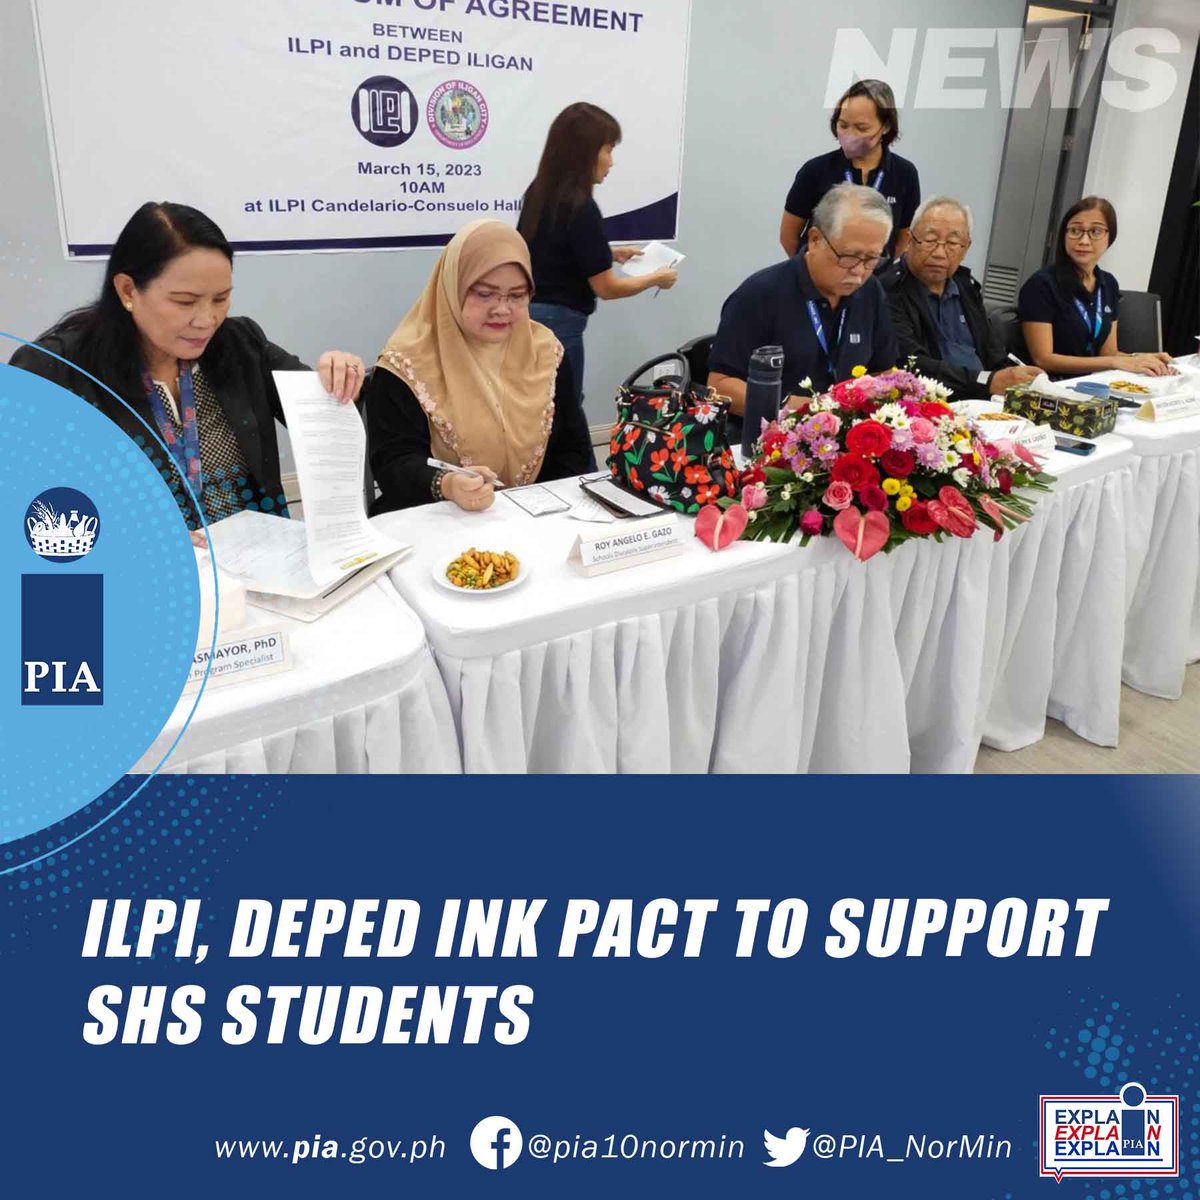 ILPI and the DepEd Iligan executed a Memorandum of Agreement for support to a TecVoc Program for Senior High School students under the DepEd. More than 13 national high schools in Iligan will benefit from the program.

👉 pia.gov.ph/news/2023/03/1…

#ExplainExplainExplain